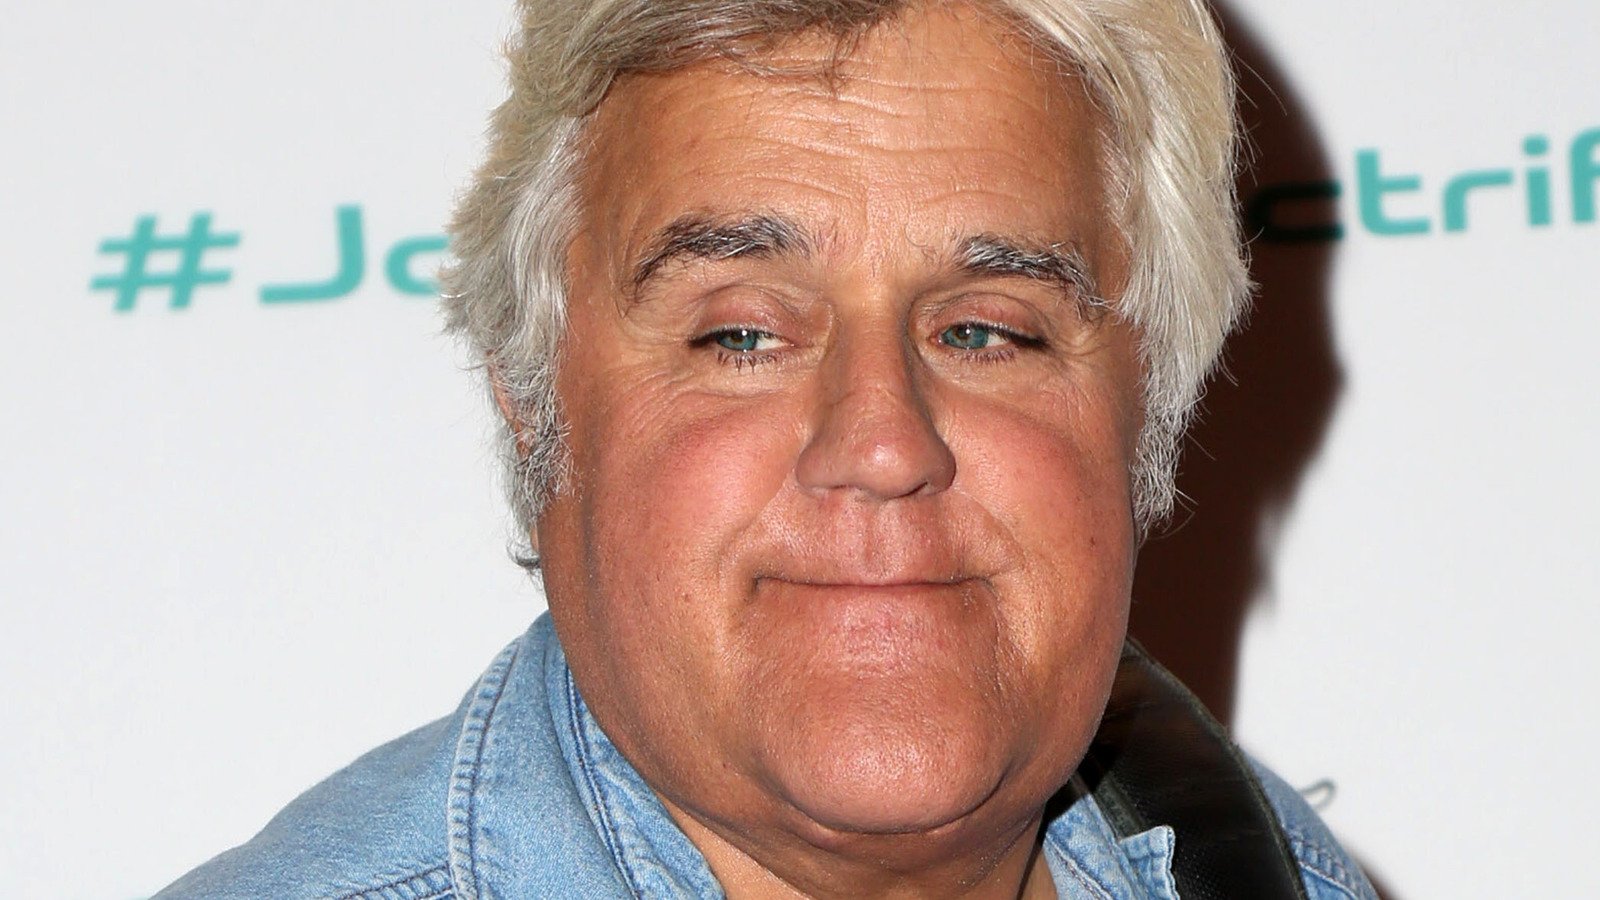 Jay Leno Hospitalized With Serious Burns To His Face After Car Fire